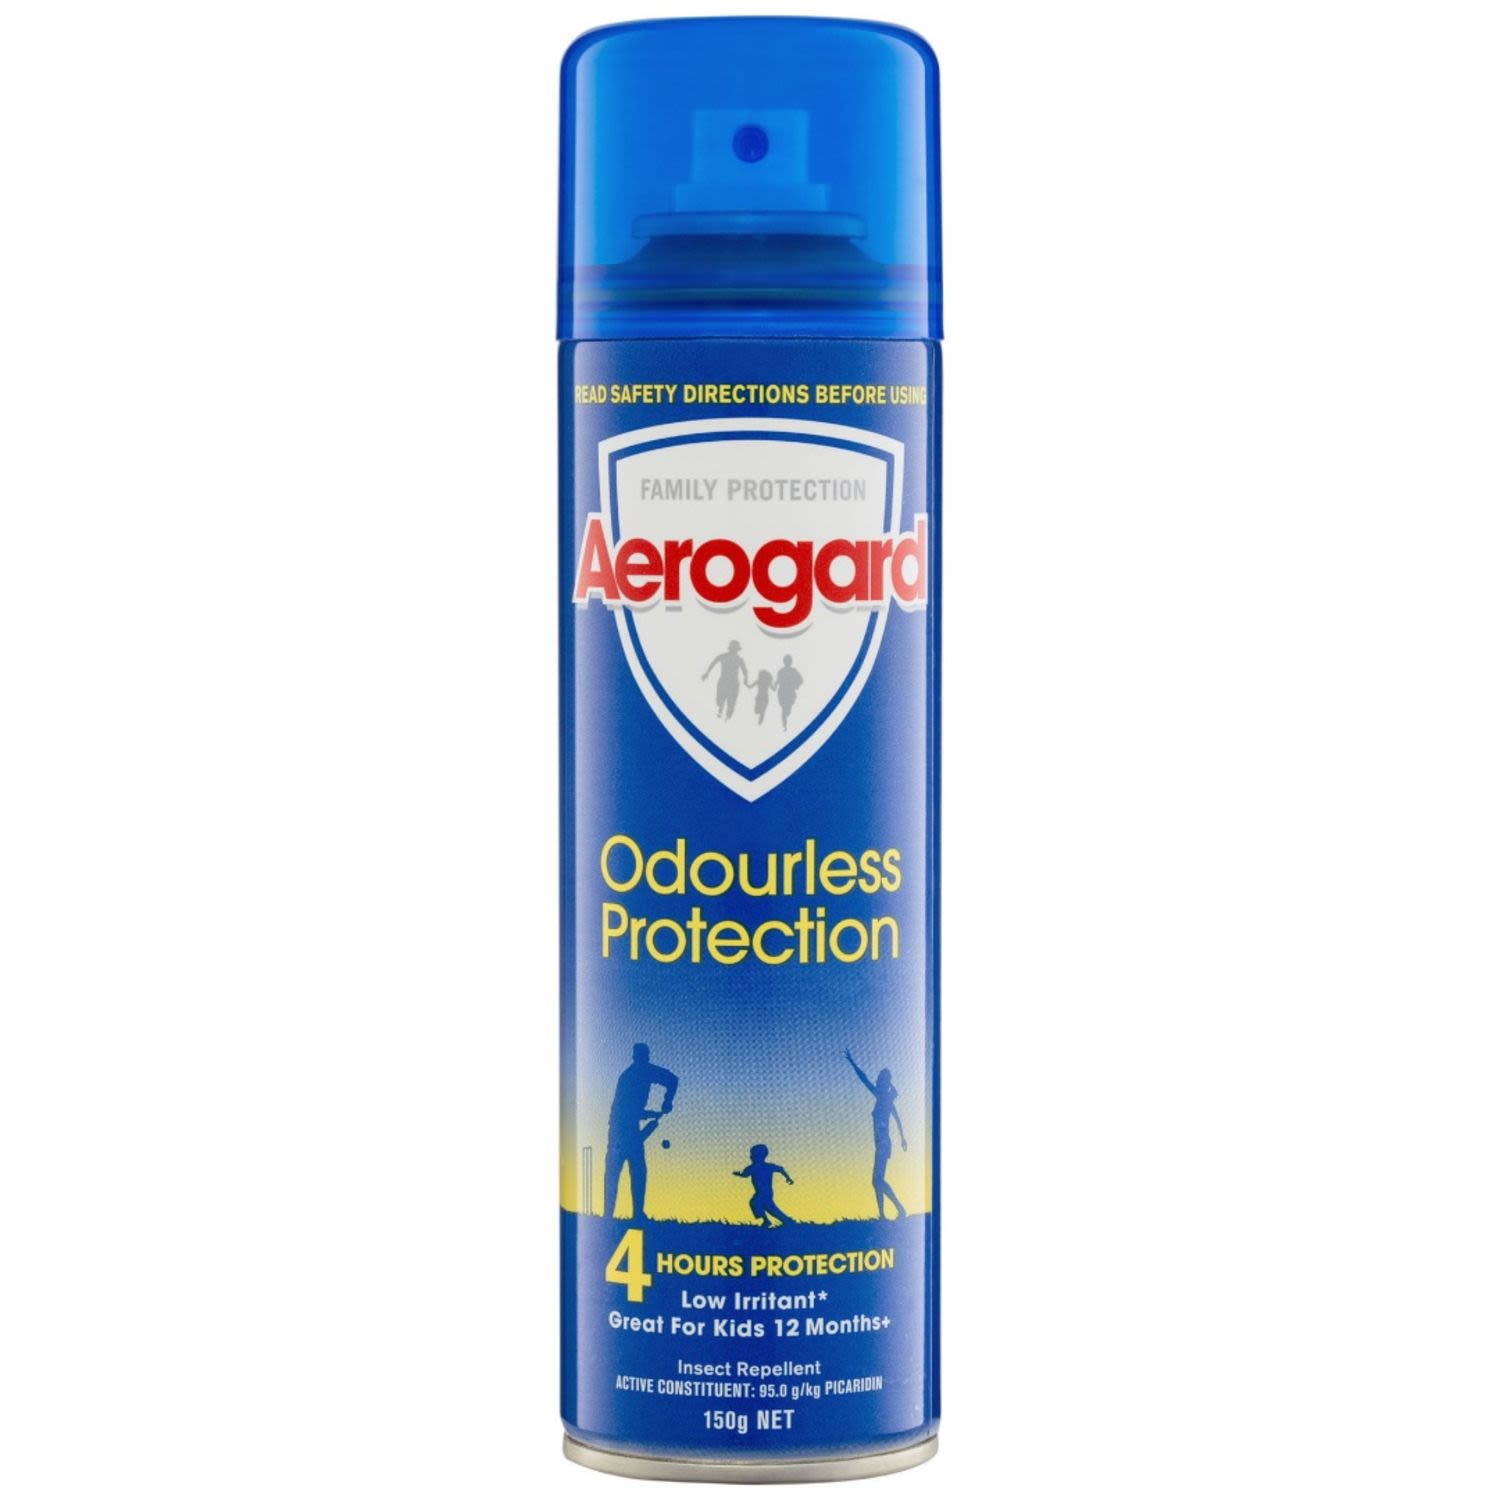 <p>Aerogard Insect Repellent Aerosol Spray providing odourless protection against mosquitoes and other insects.</p><p>- Repels mosquitoes, flies, sandflies and other annoying and biting insects for up to 4 hours.<br />- Protects you and your family against disease-carrying insects.<br />- Odourless.<br />- Low irritant on skin.<br />- Non-greasy formula.<br />- Suitable for children 12 months & over.<br />- Additional repellency can be gained by lightly spraying clothing.</p><br /> <br /> <br /><br />Country of Origin: Made in Australia from imported and local ingredients